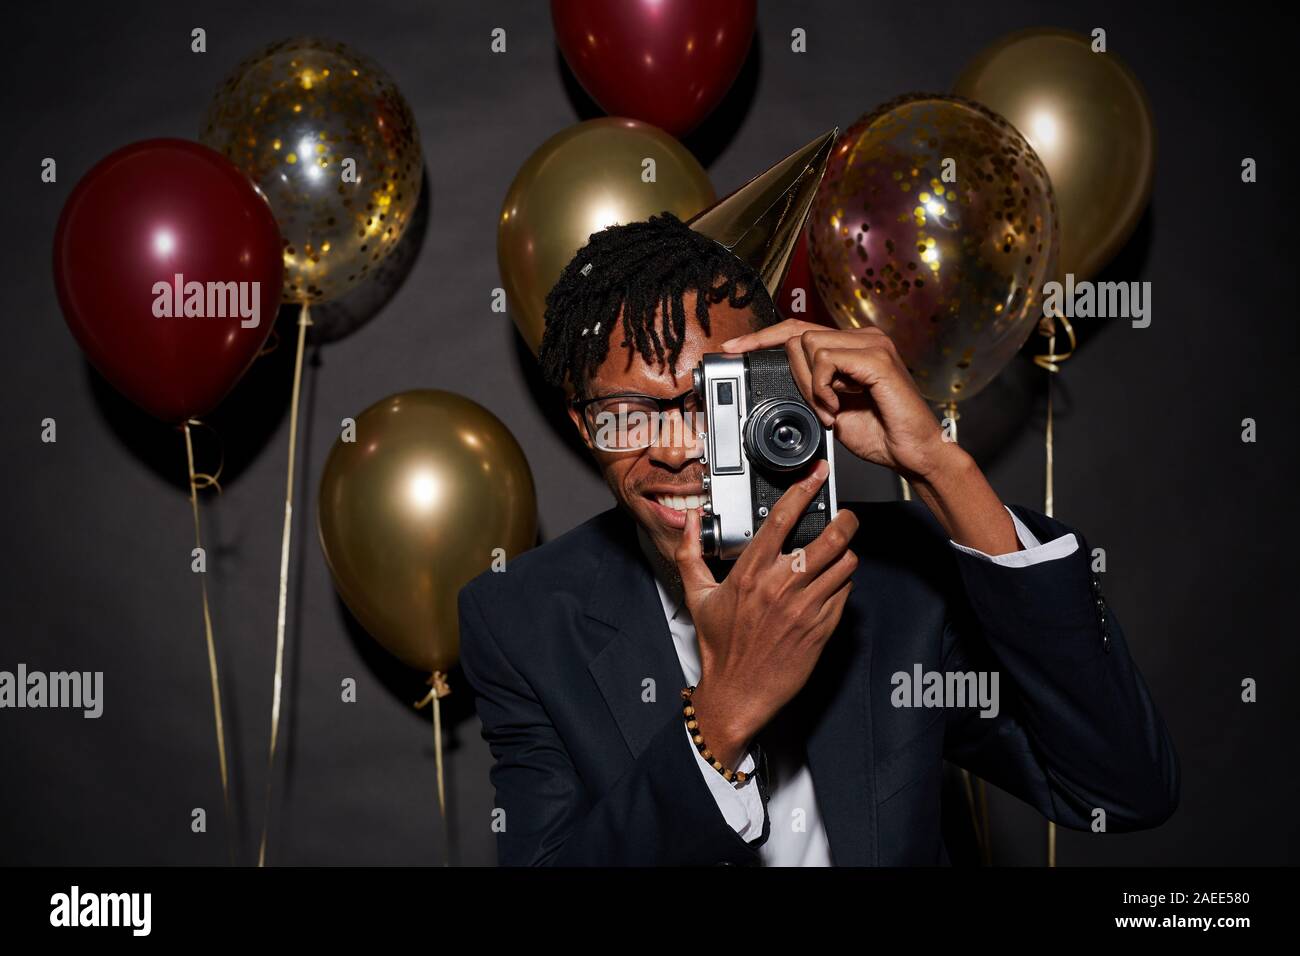 Waist up portrait of contemporary African man holding photo camera while posing against black background with party balloons, shot with flash Stock Photo